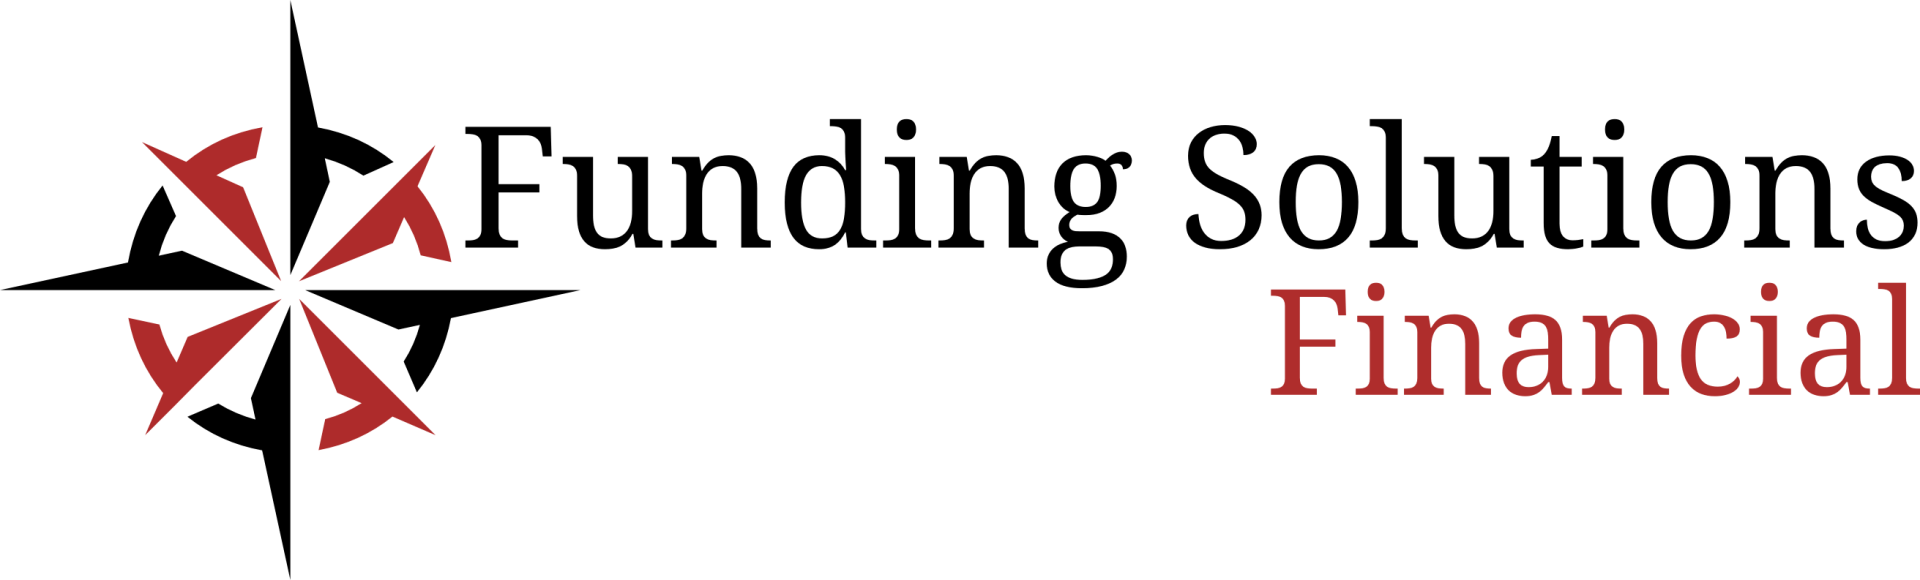 Funding Solutions Financial